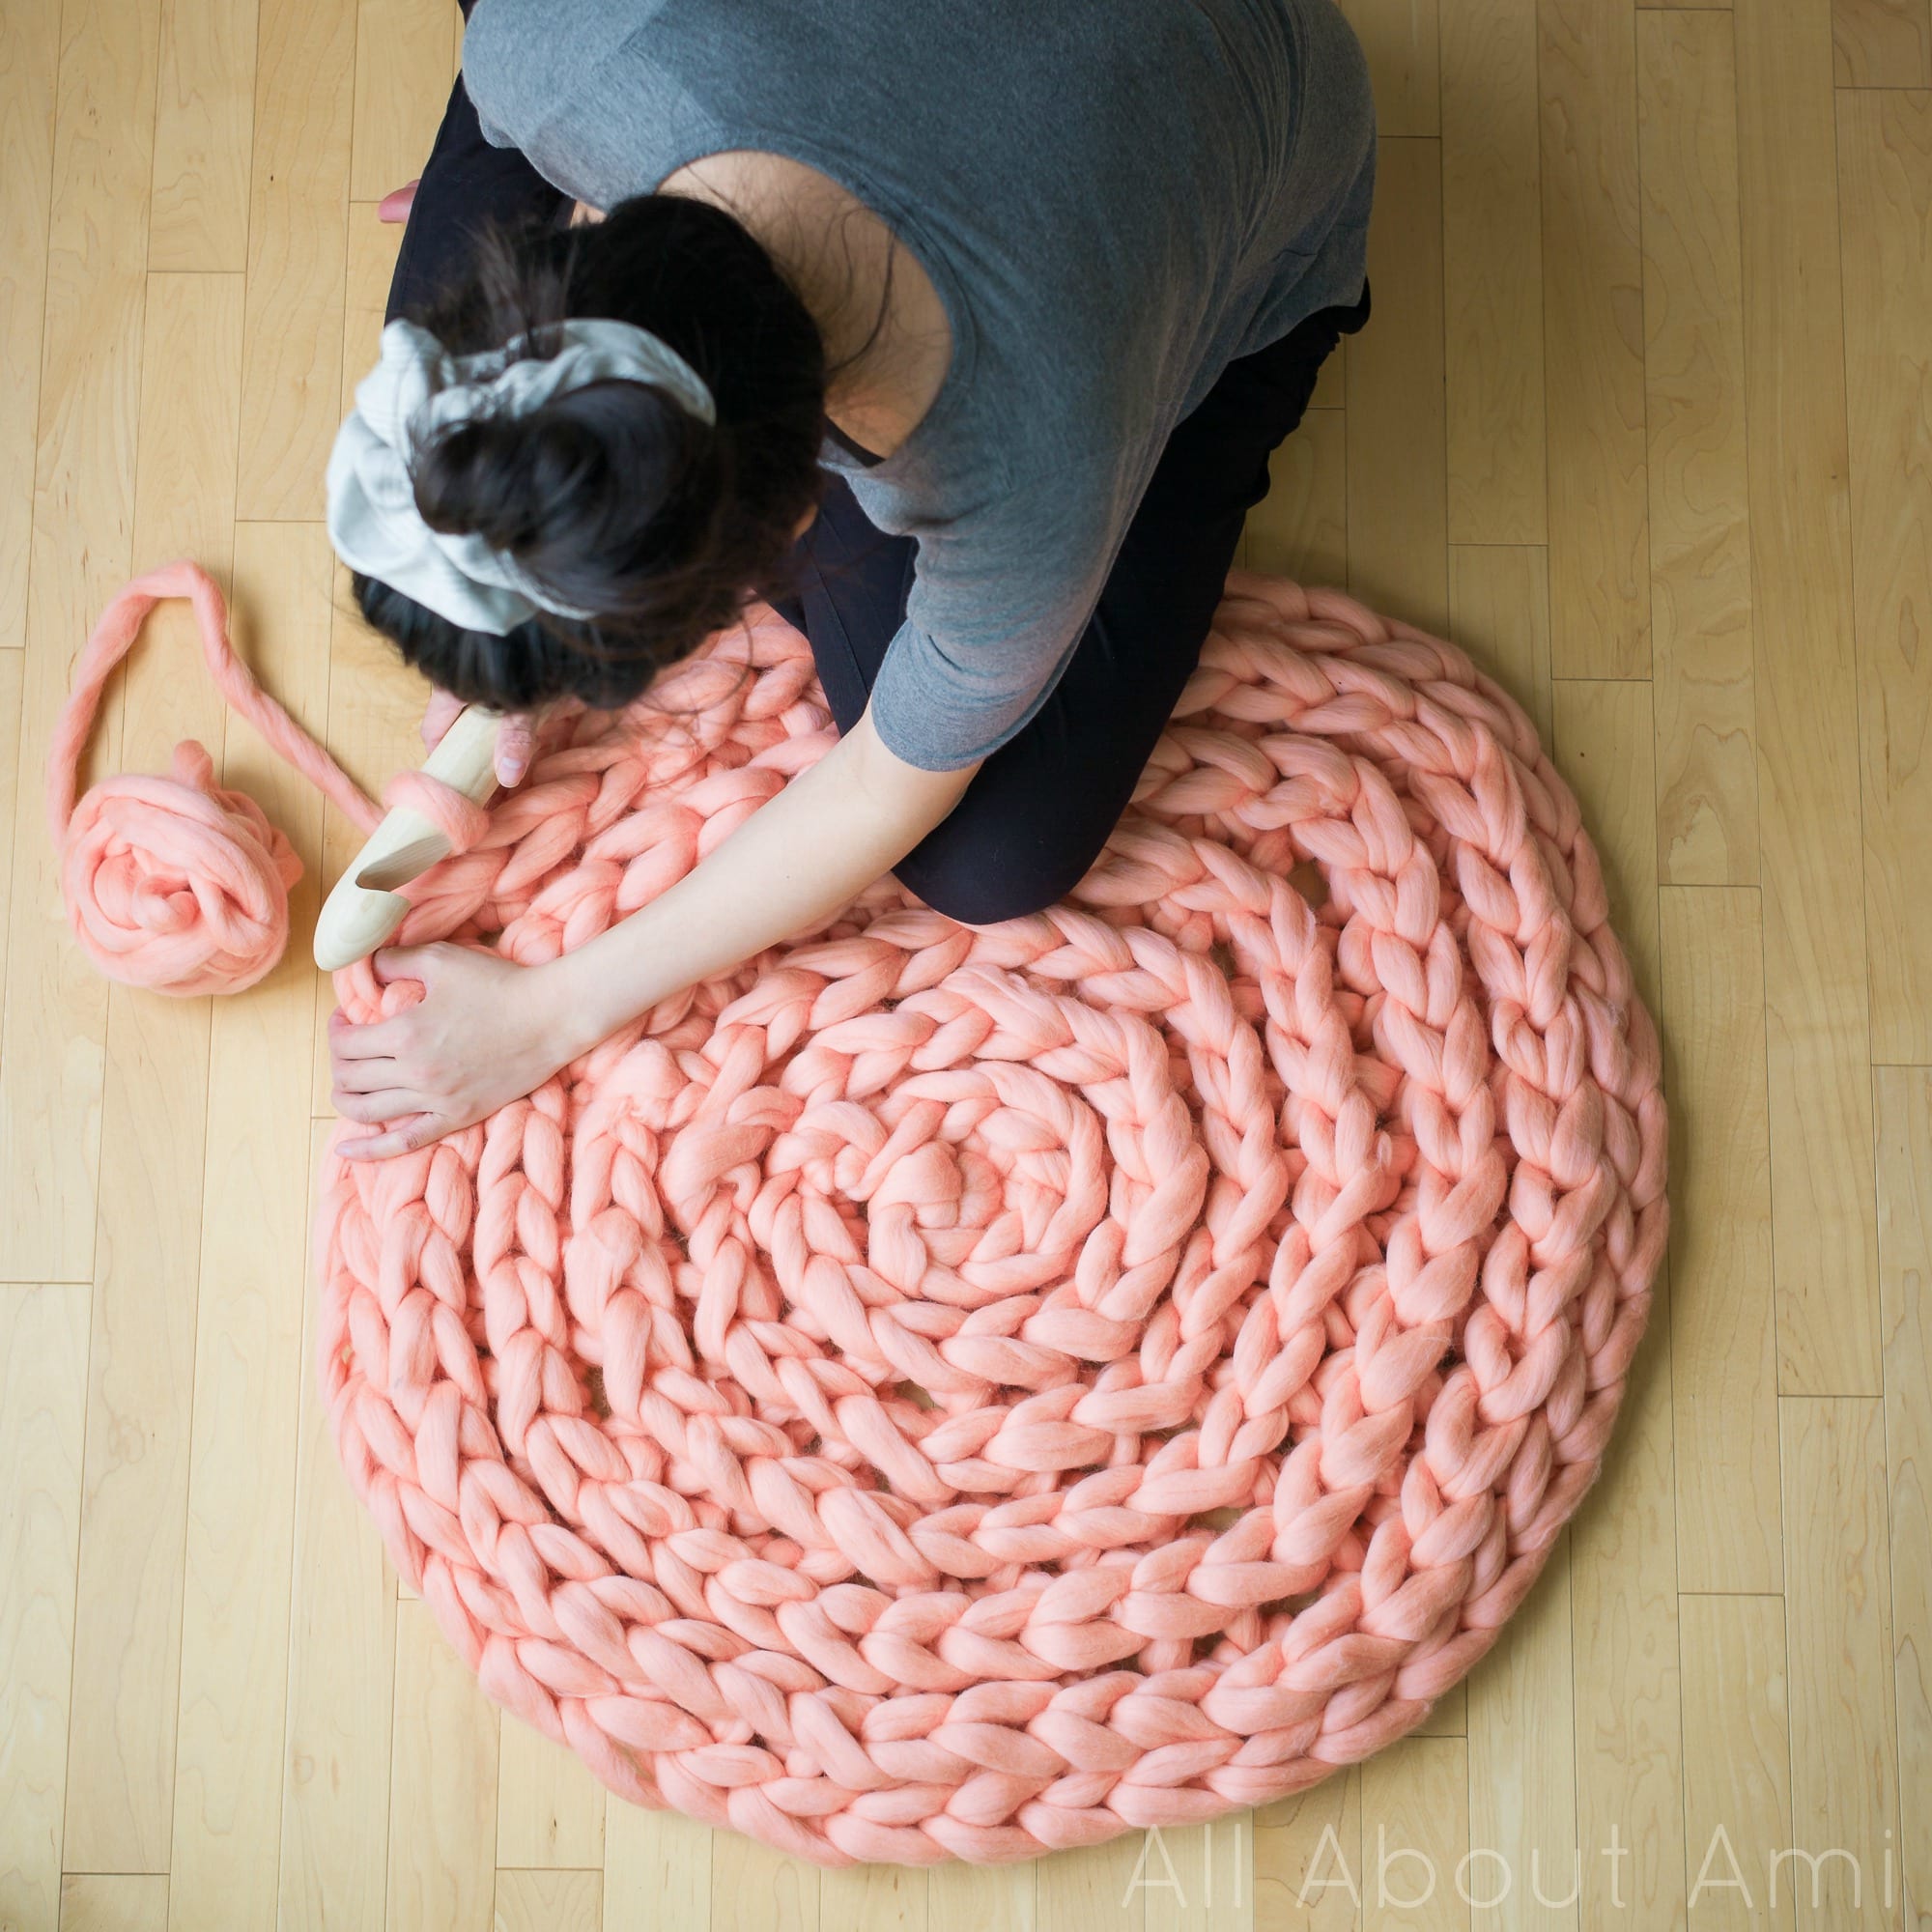 Extreme Crocheted Rug - All About Ami